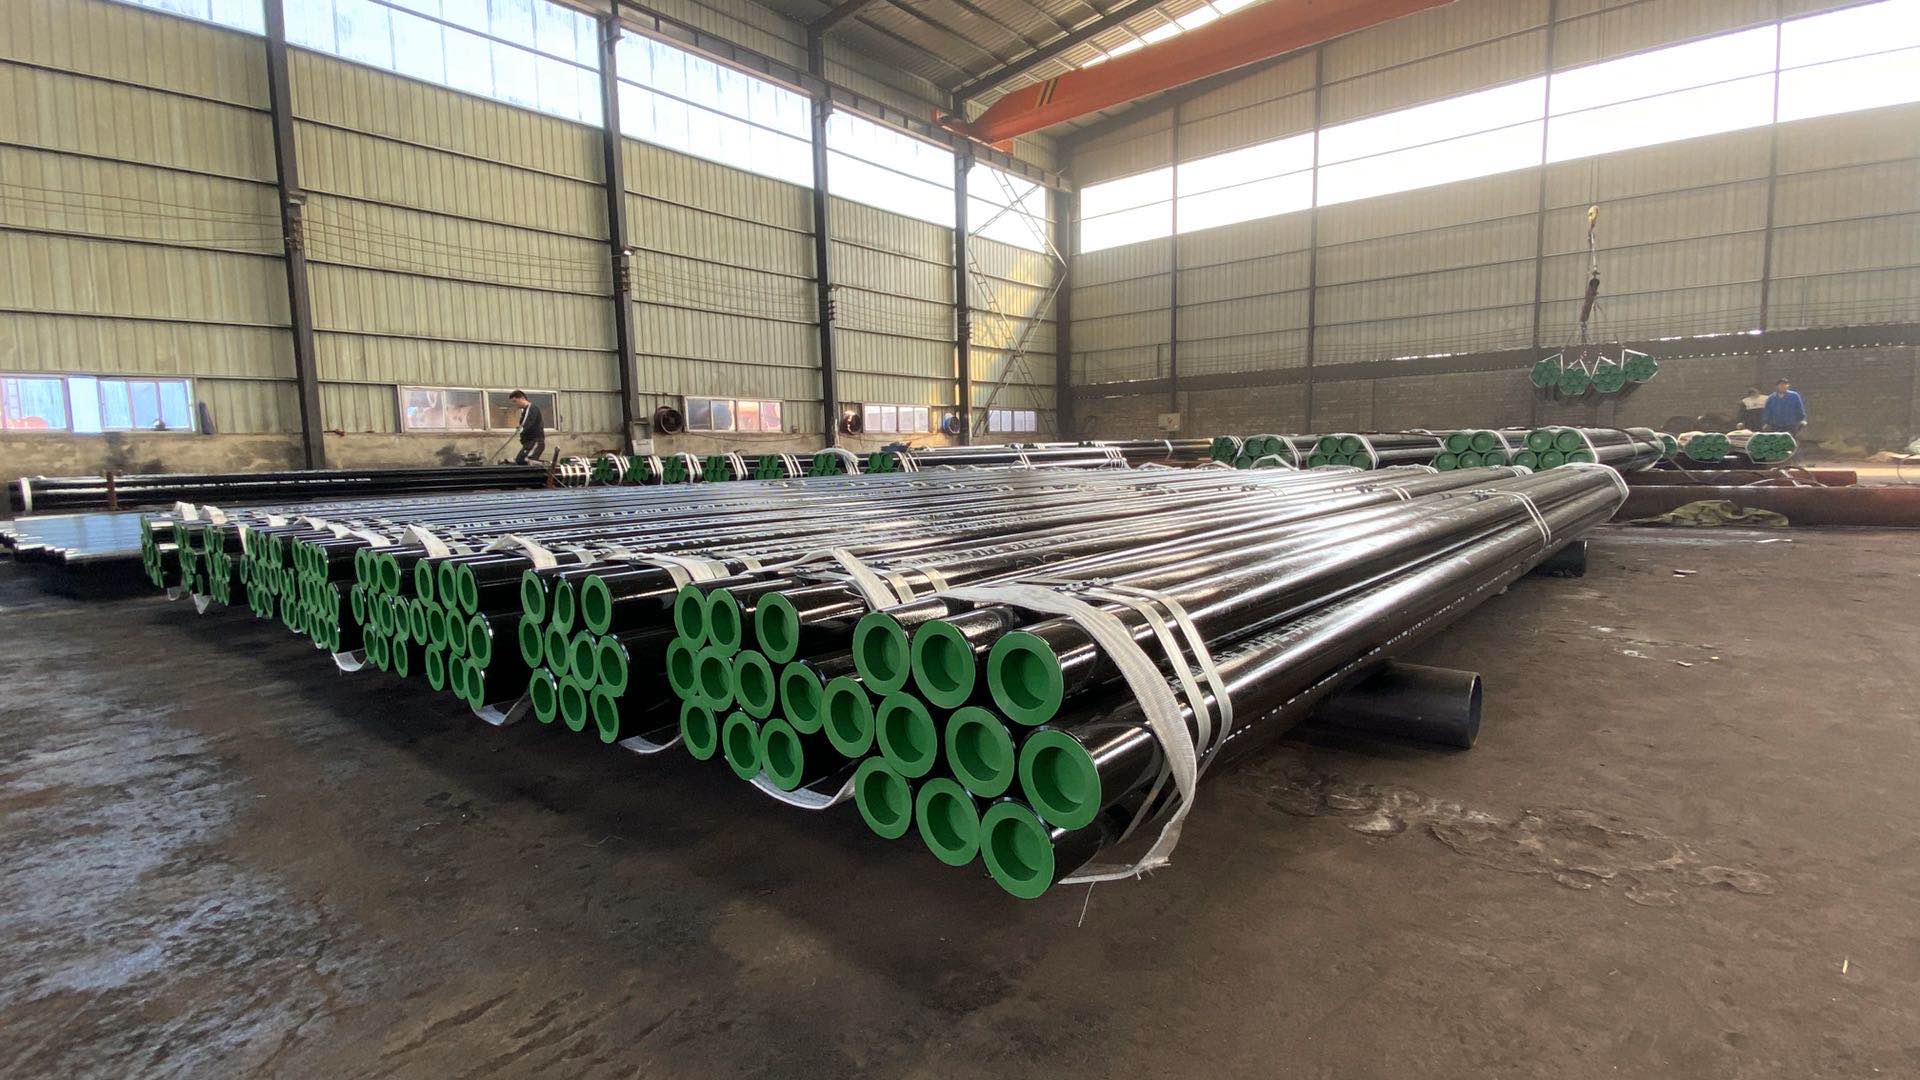 JIS G 3454 Carbon Steel Pipes for Pressure Service